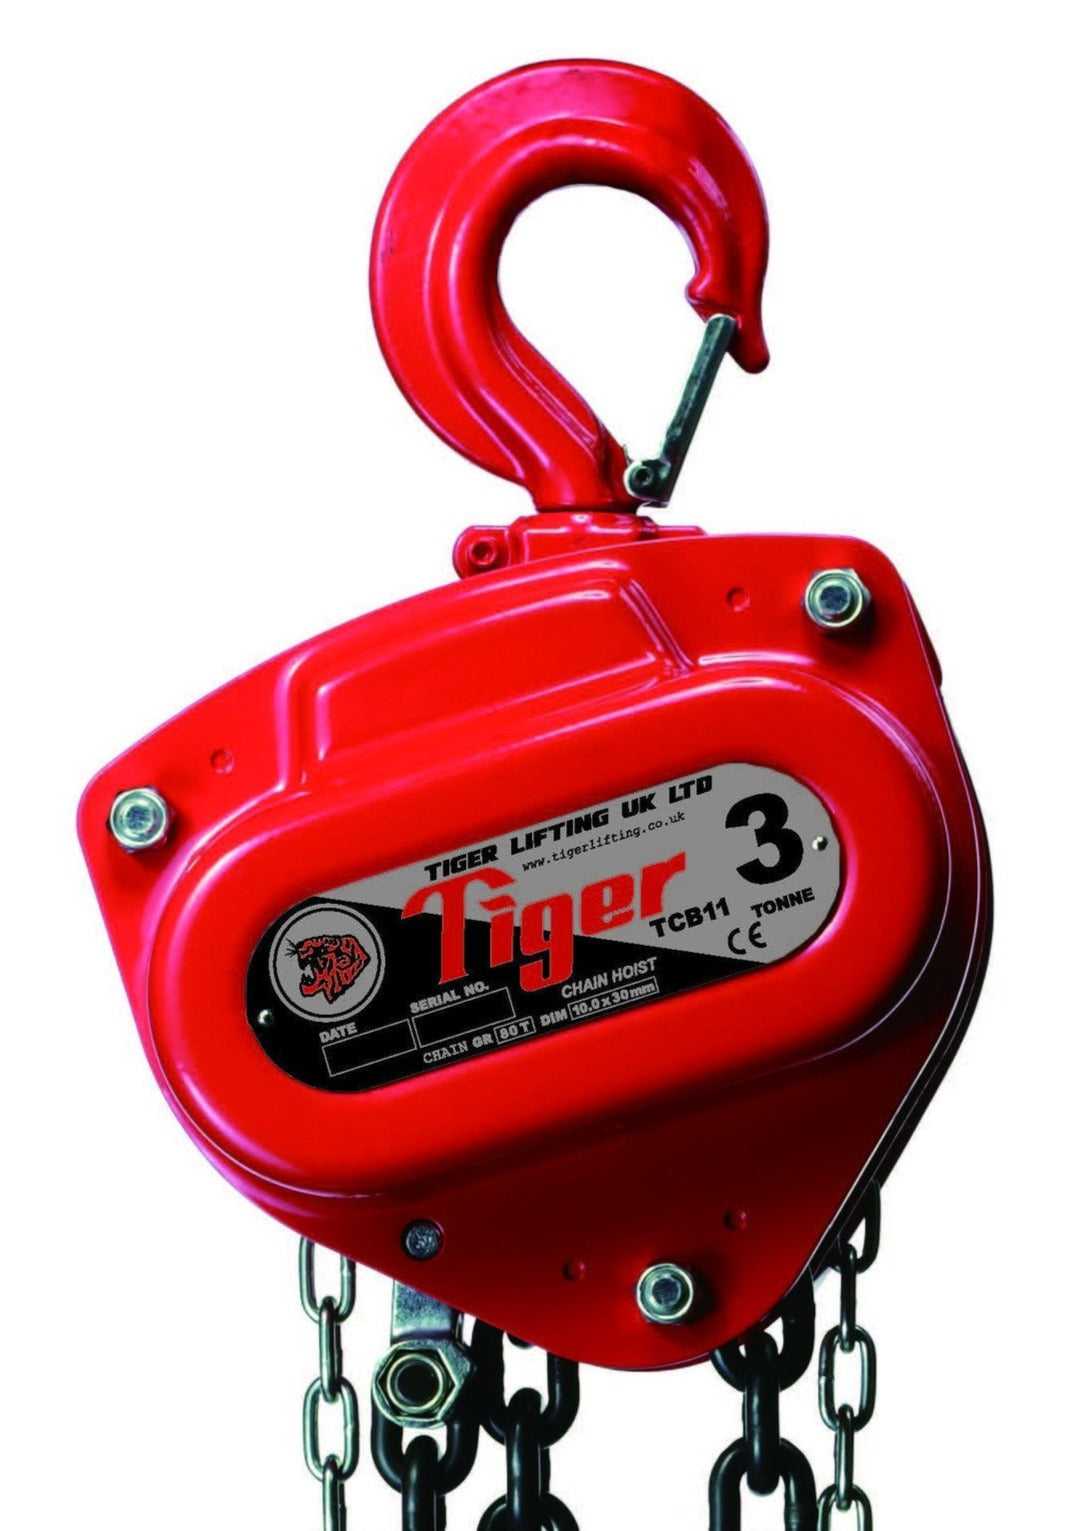 TIGER CHAIN BLOCK PROCB14, 3.0t CAPACITY Ref: 211-6 - available from RiggingUK on a next working day delivery 